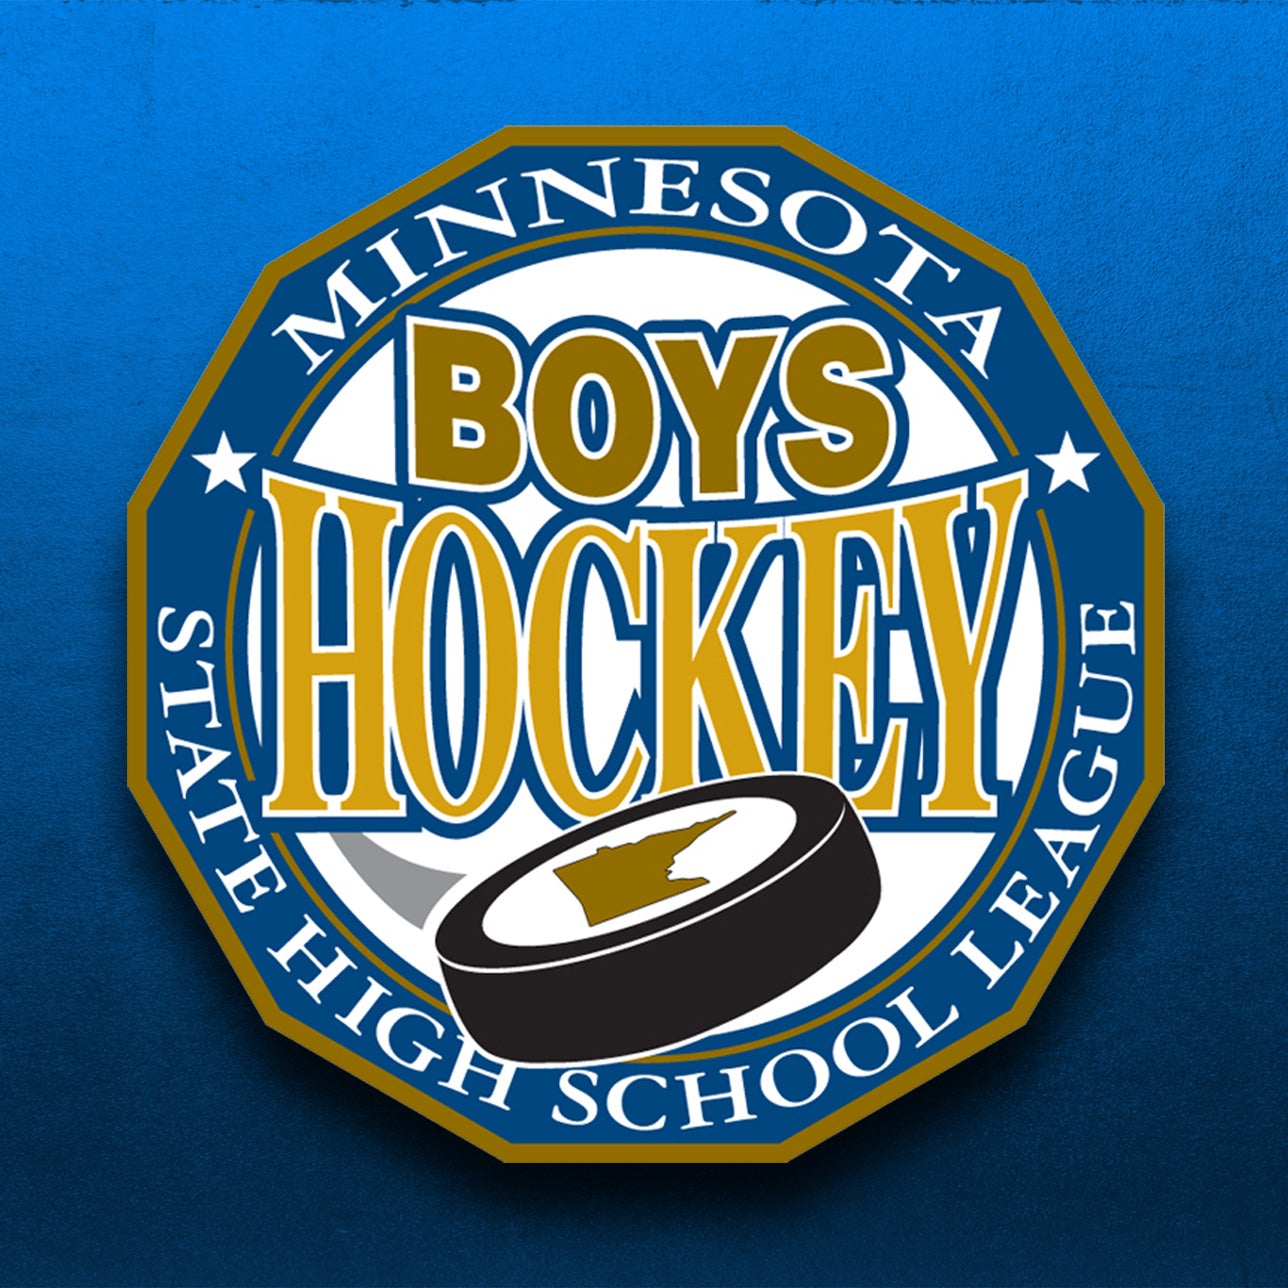 Here are the brackets for the 2023 Minnesota boys' state hockey